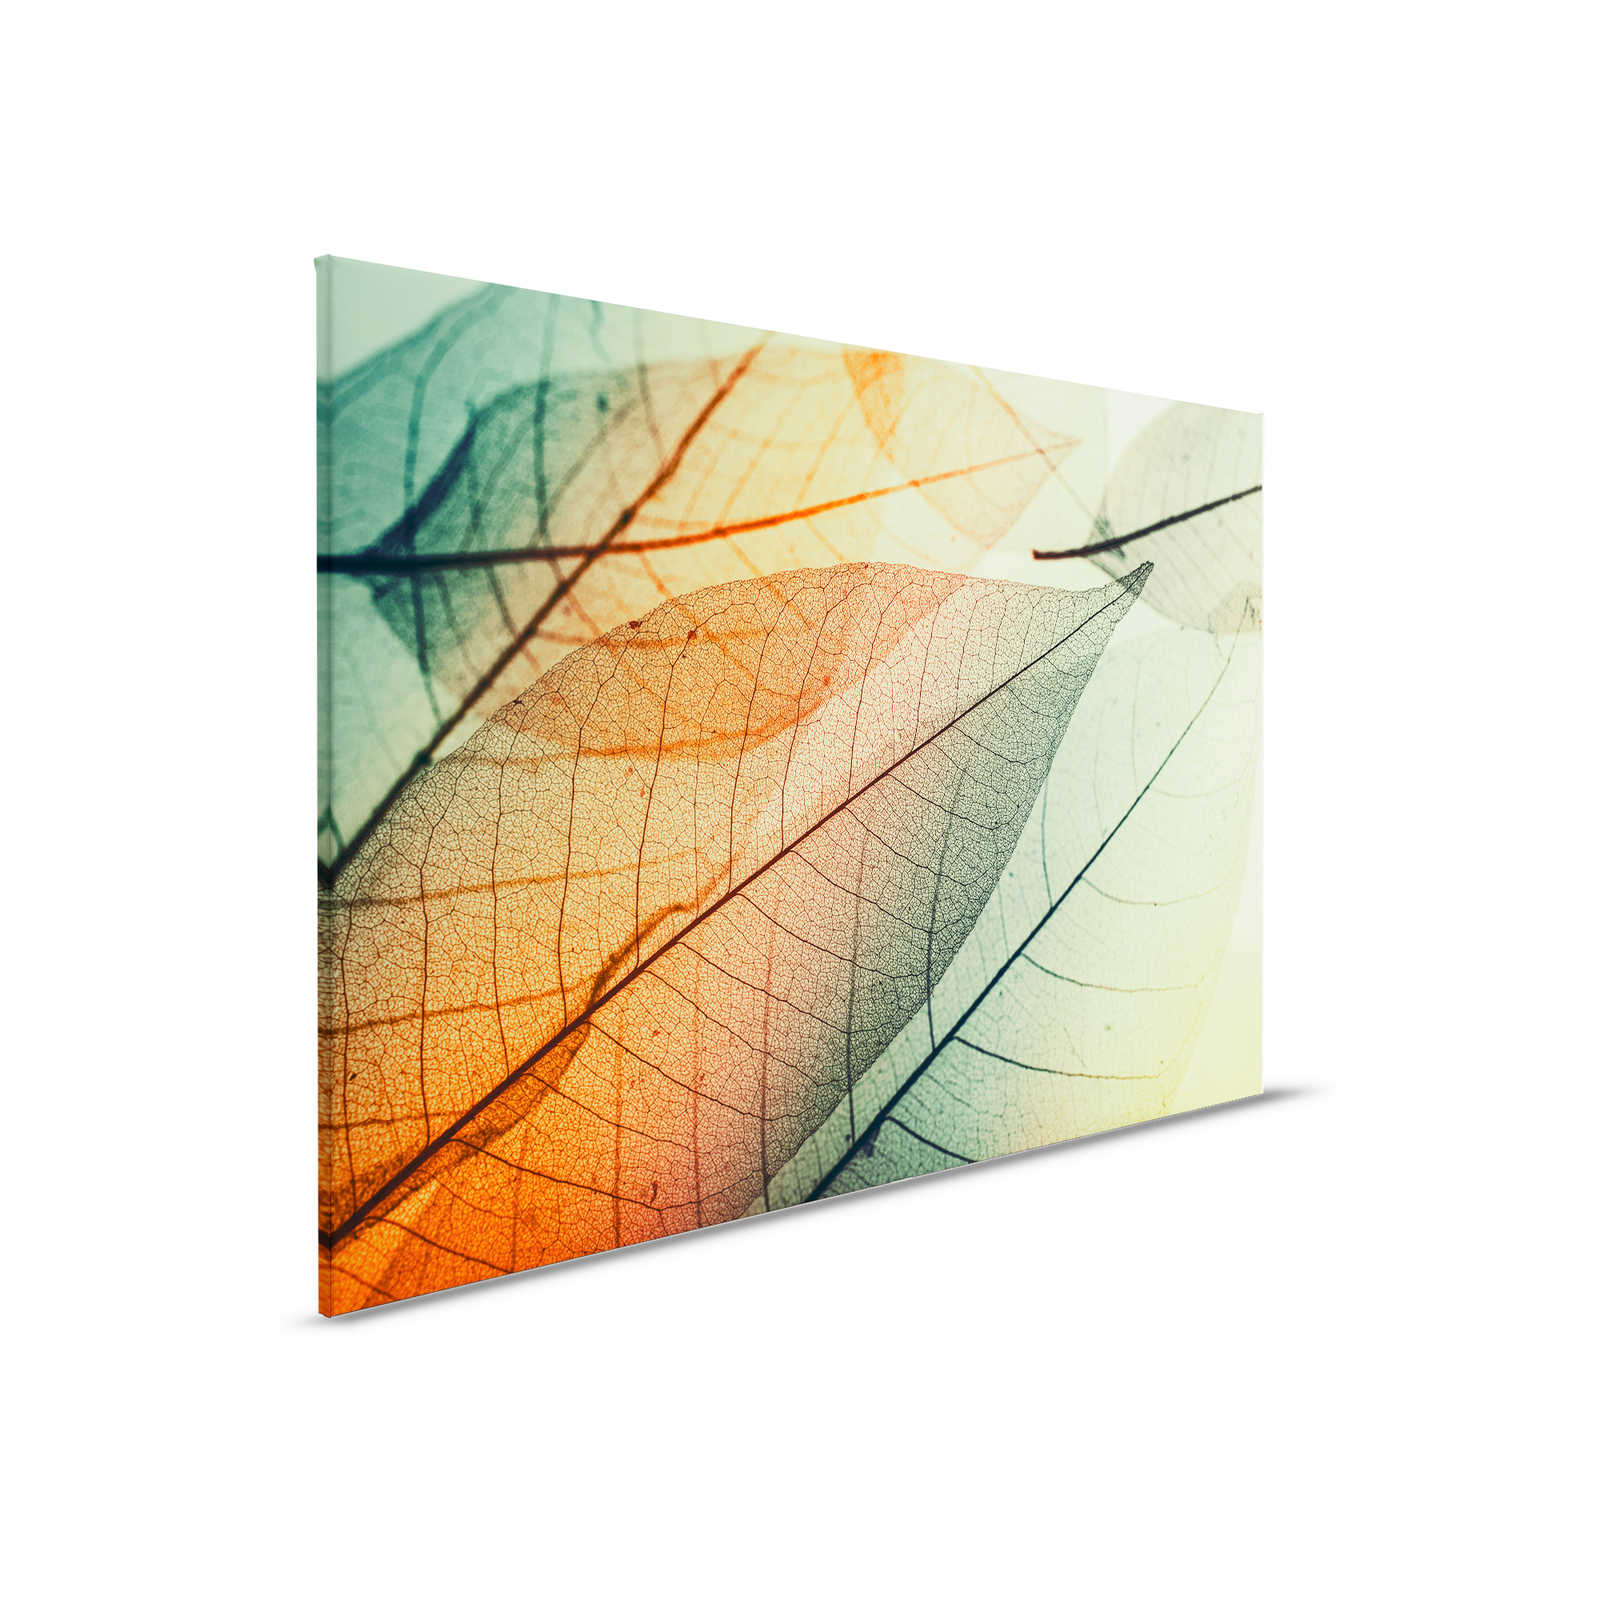 Canvas with leaves design - 0,90 m x 0,60 m
